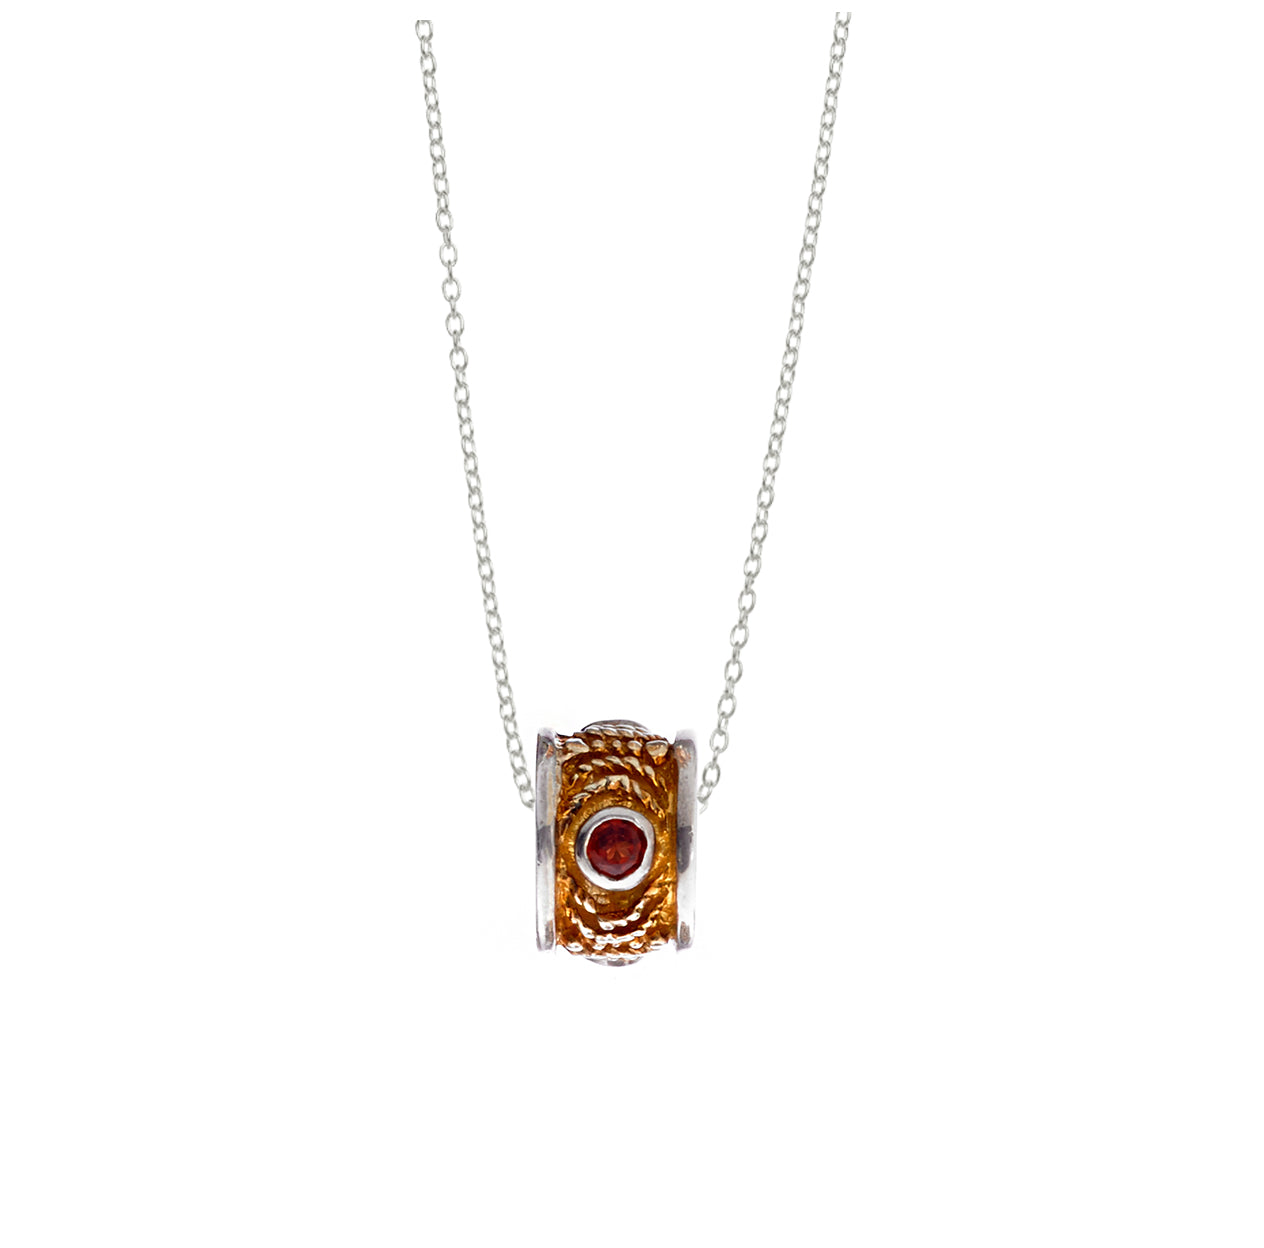 January Garnet Sterling Silver with 14k Gold Vermeil Bead Necklace